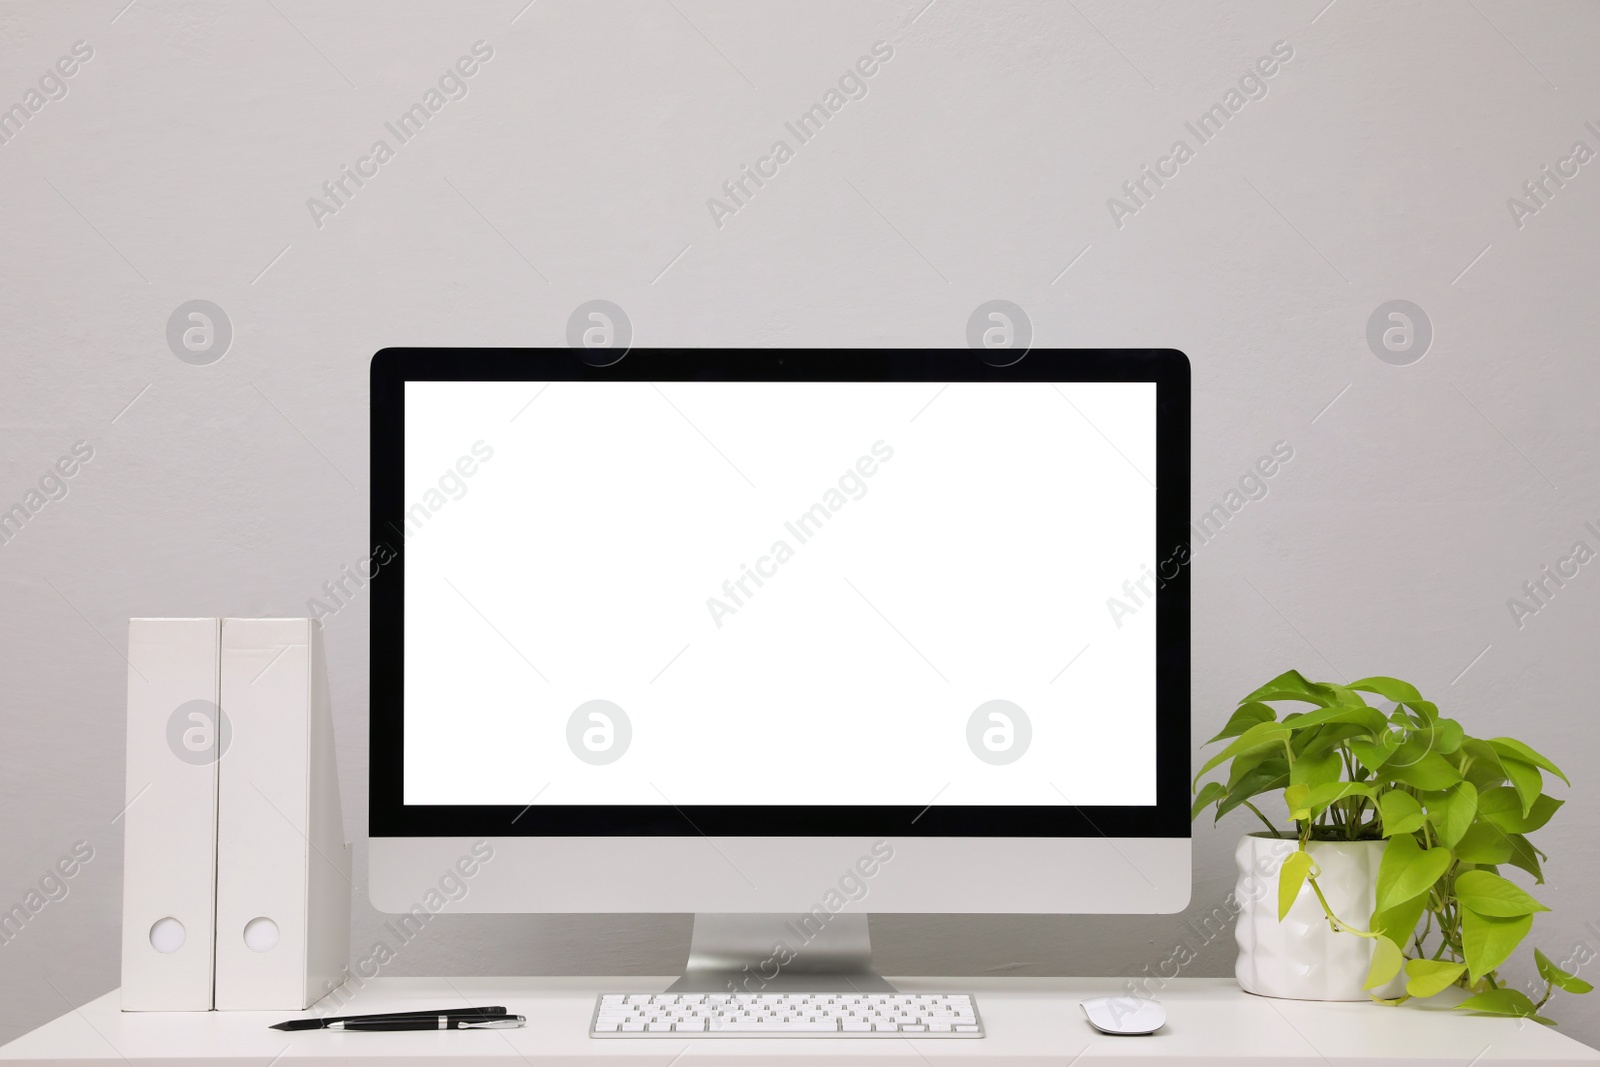 Photo of Comfortable workplace with blank computer display and plant on desk near light grey wall. Space for text